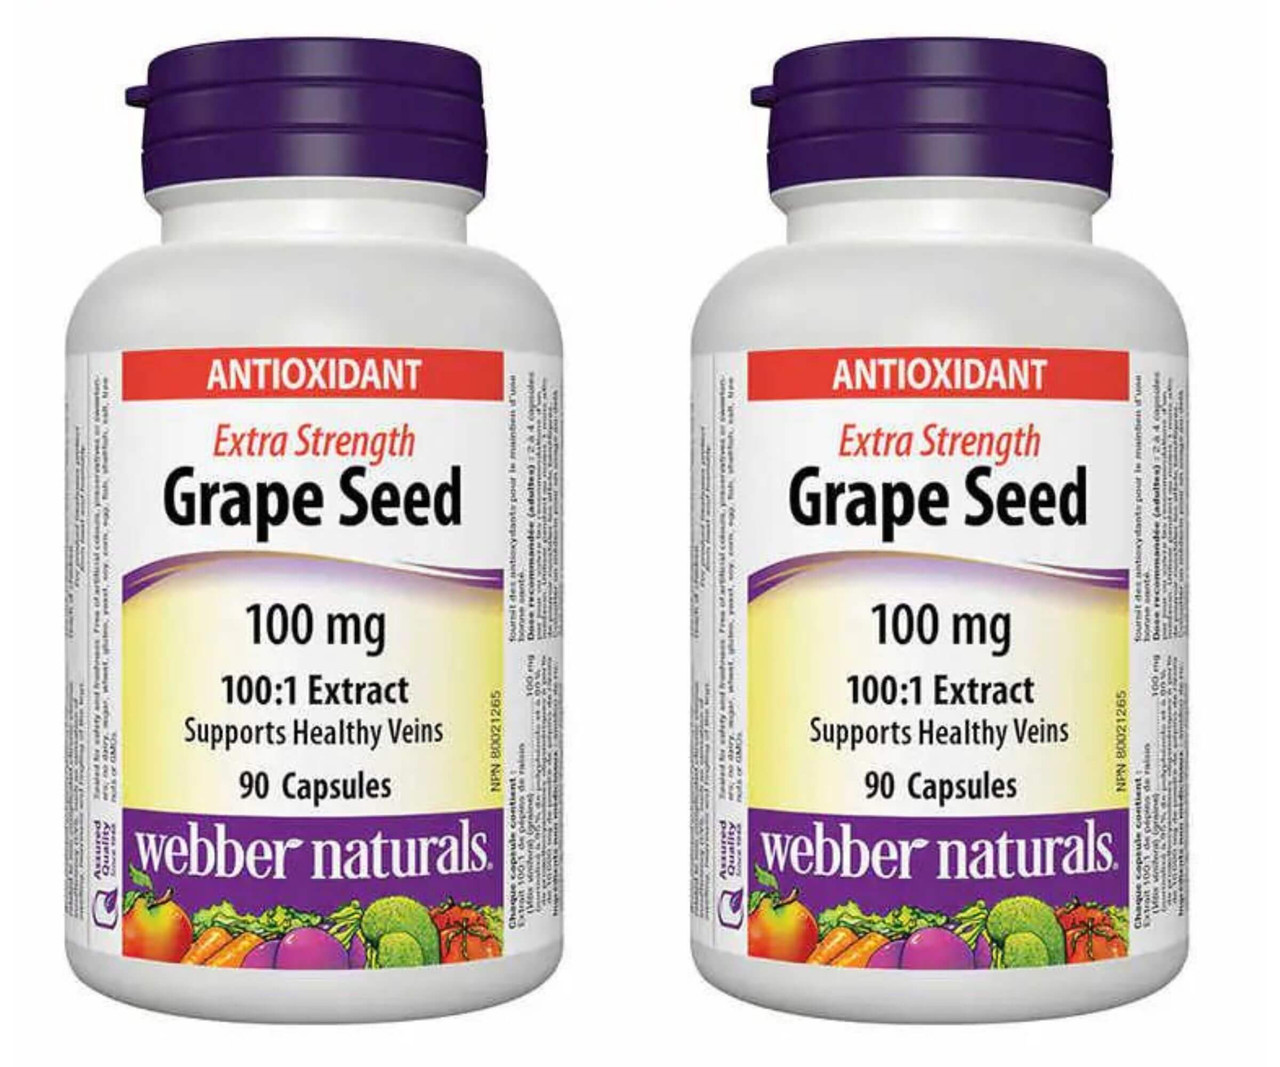 Webber Naturals Extra Strength Grape Seed 100:1 Extract 100 mg Capsules - 90-count, 2-pack | Antioxidant Support- Chicken Pieces